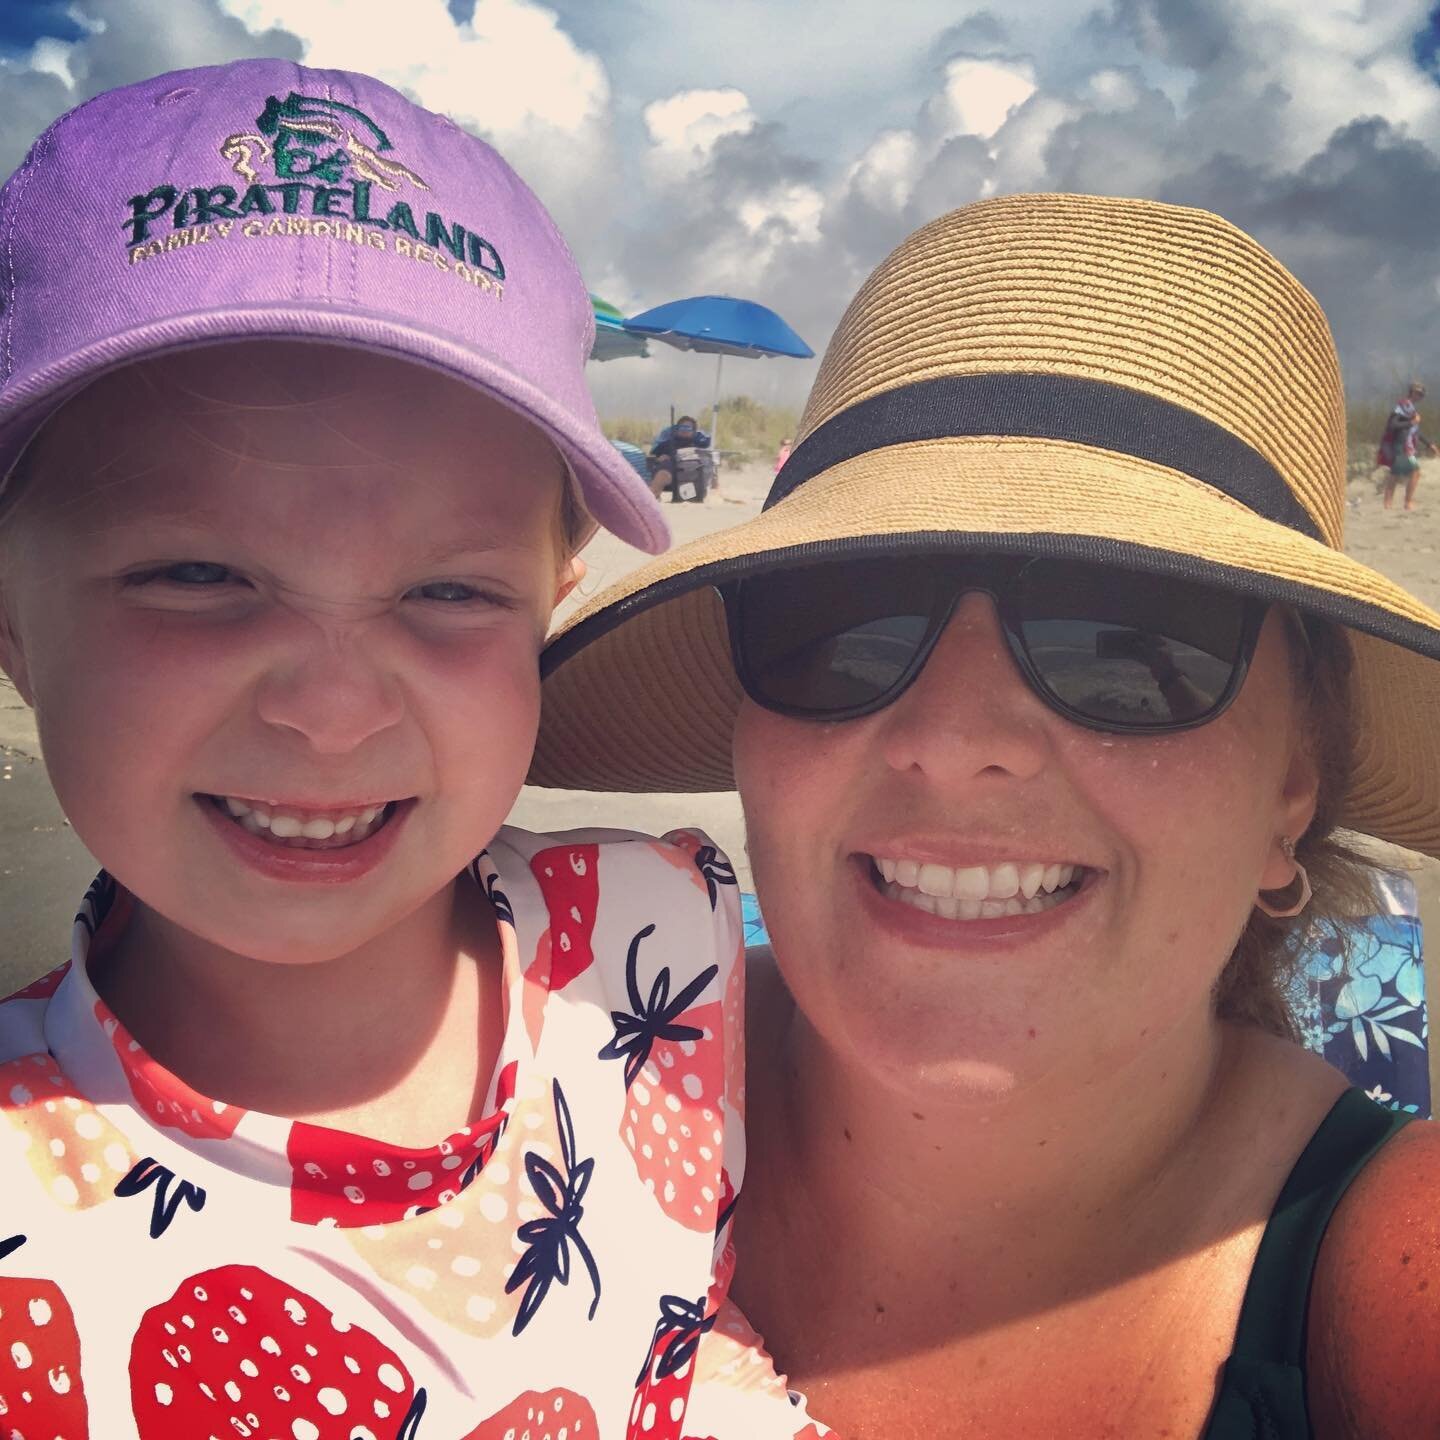 Two of us like sitting on the beach and two of us like playing in the waves. Soaking up all the sun and fun and sand and memories with these four!! #summer2021 #pirateland